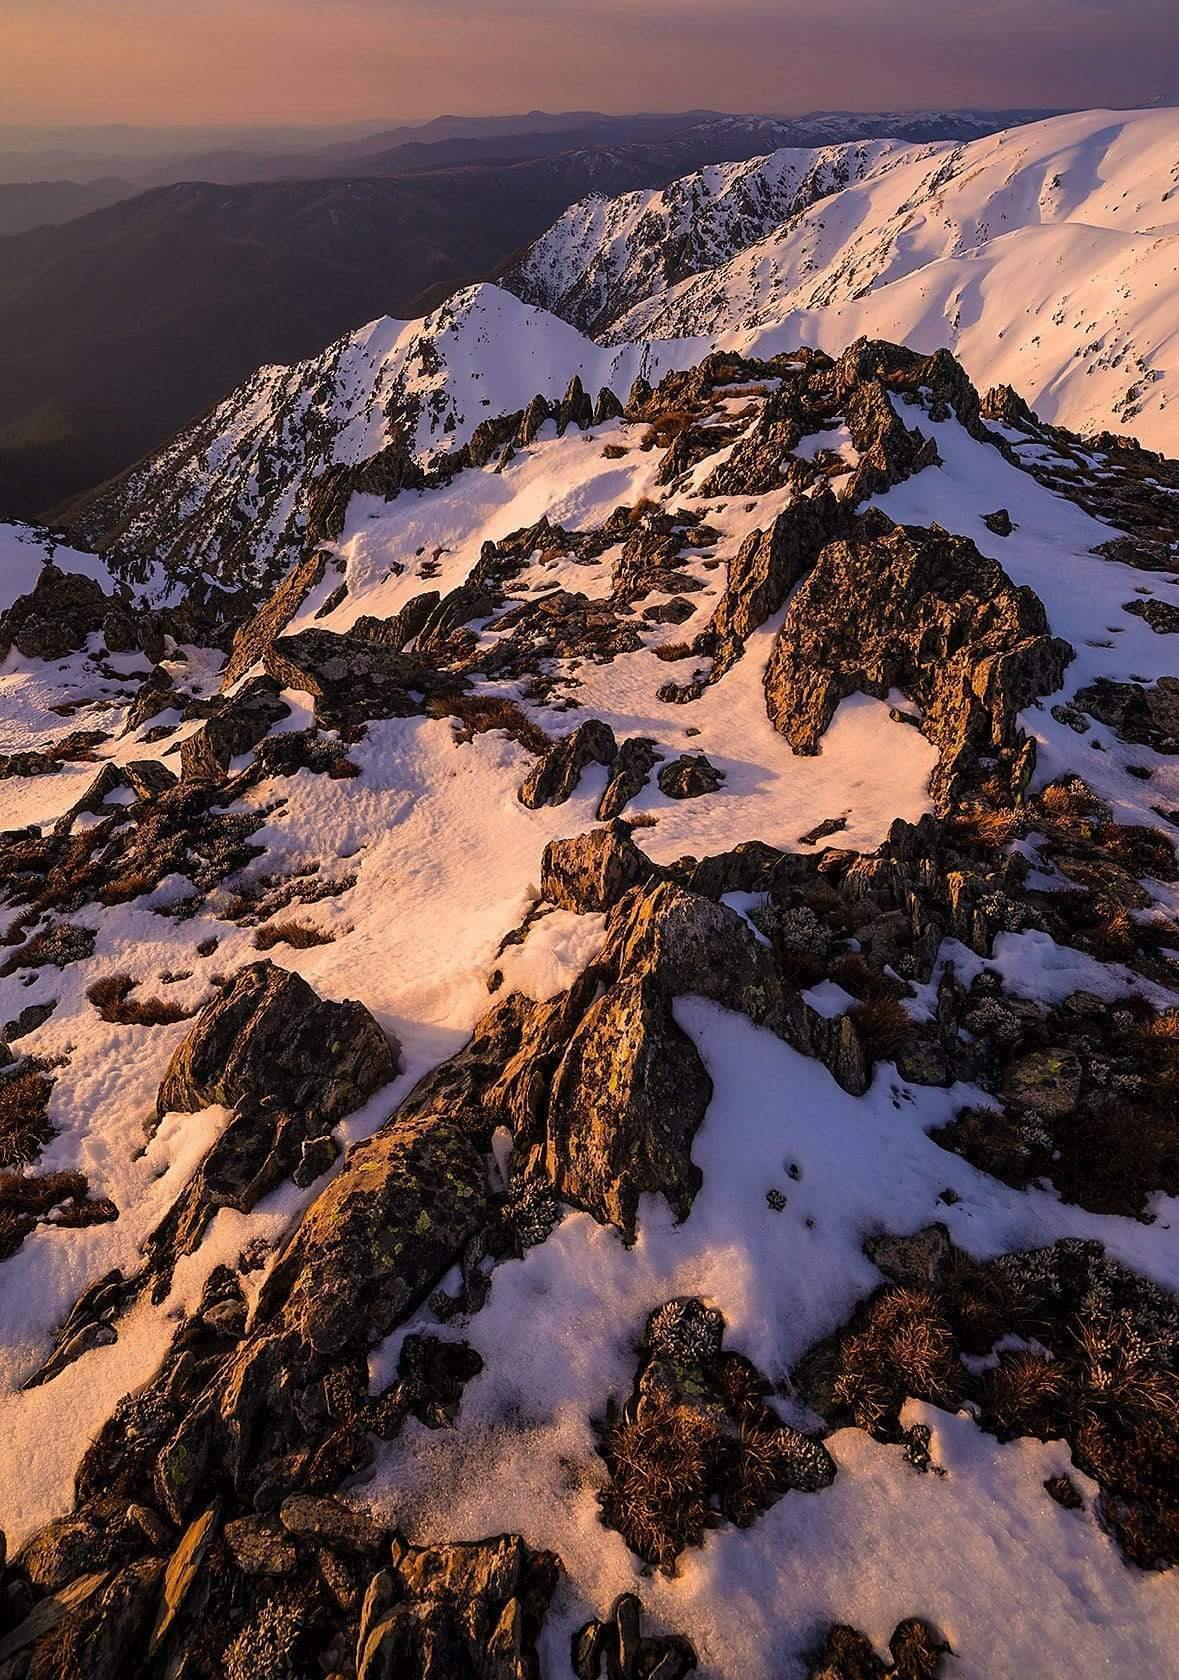 A giant mountain wall fully covered with fresh snow and some spots of wet sand on it, depicting a white ice-cream with chocolate chips on it, Carruthers Sunset - Snowy Mountains, NSW